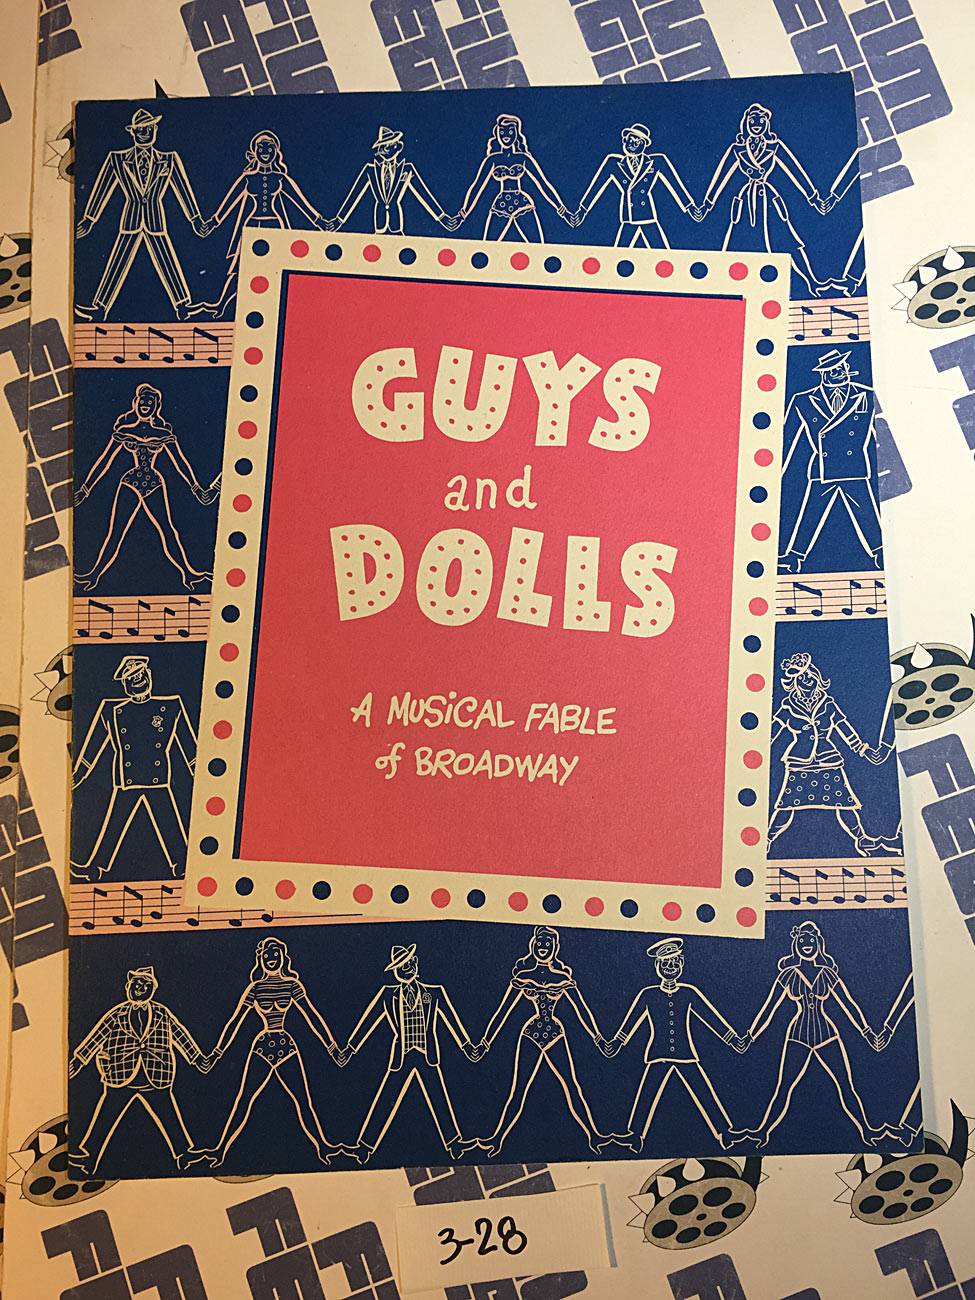 Feuer and Martin Presents Guys and Dolls: A Musical Fable of Broadway 1950 Souvenir Program [328]